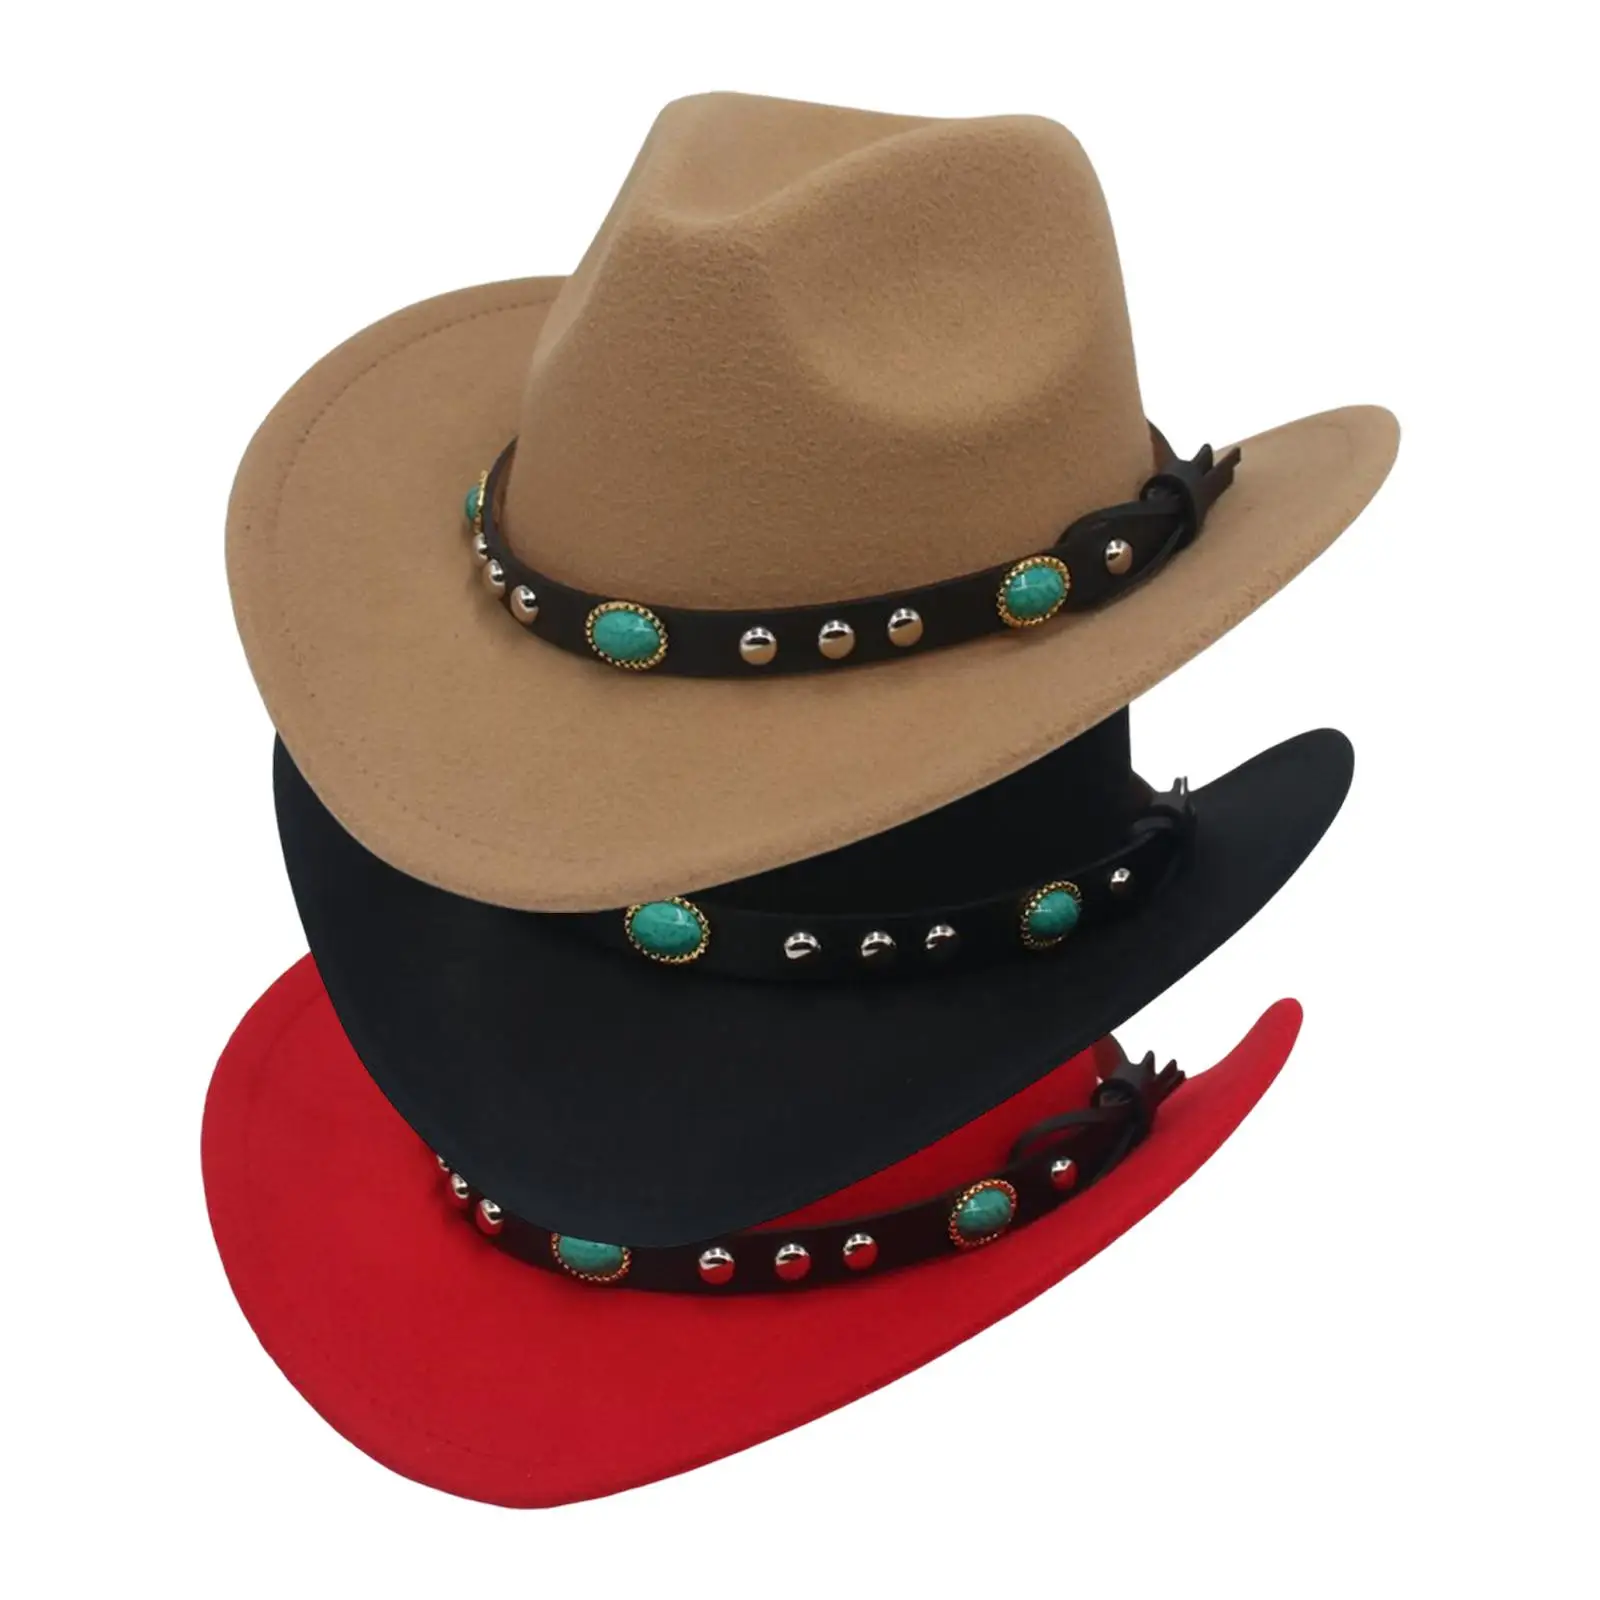 Unisex Felt Western Cowboy Hat Wide Brim Sunhat with Belt Buckle Photo Props Panama Cowgirl Hat for Adults Summer Beach Outdoor